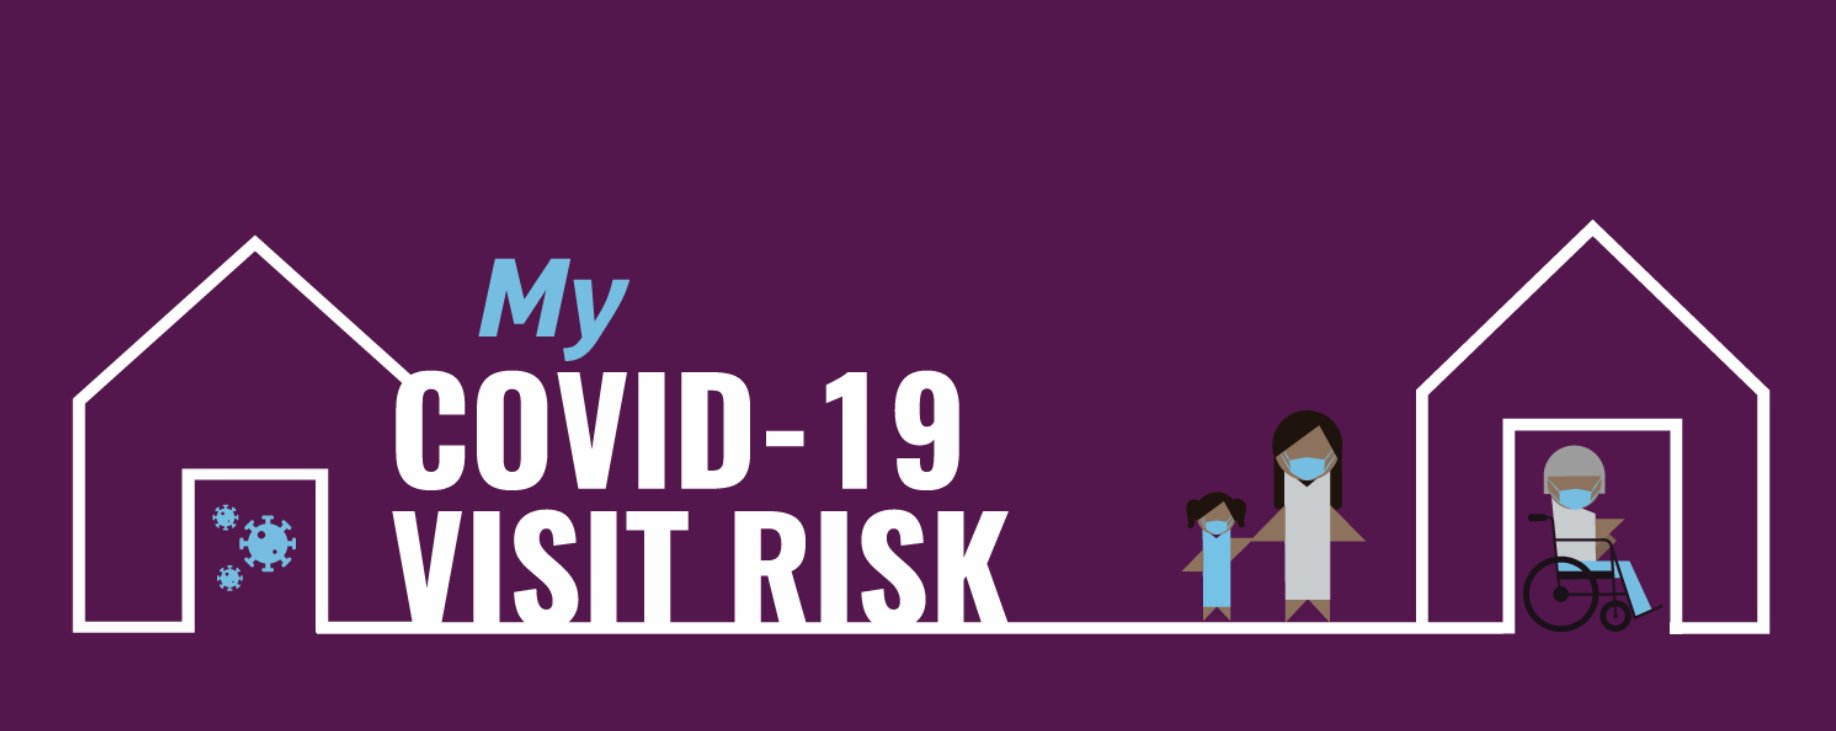 LIFE INSTITUTE on Twitter: "New Expert-Developed Tool Helps Individuals  Assess Their Risks Associated with Visiting Others During COVID-19  Pandemic. @RyersonNIA #myCOVID19VisitRisk" / Twitter